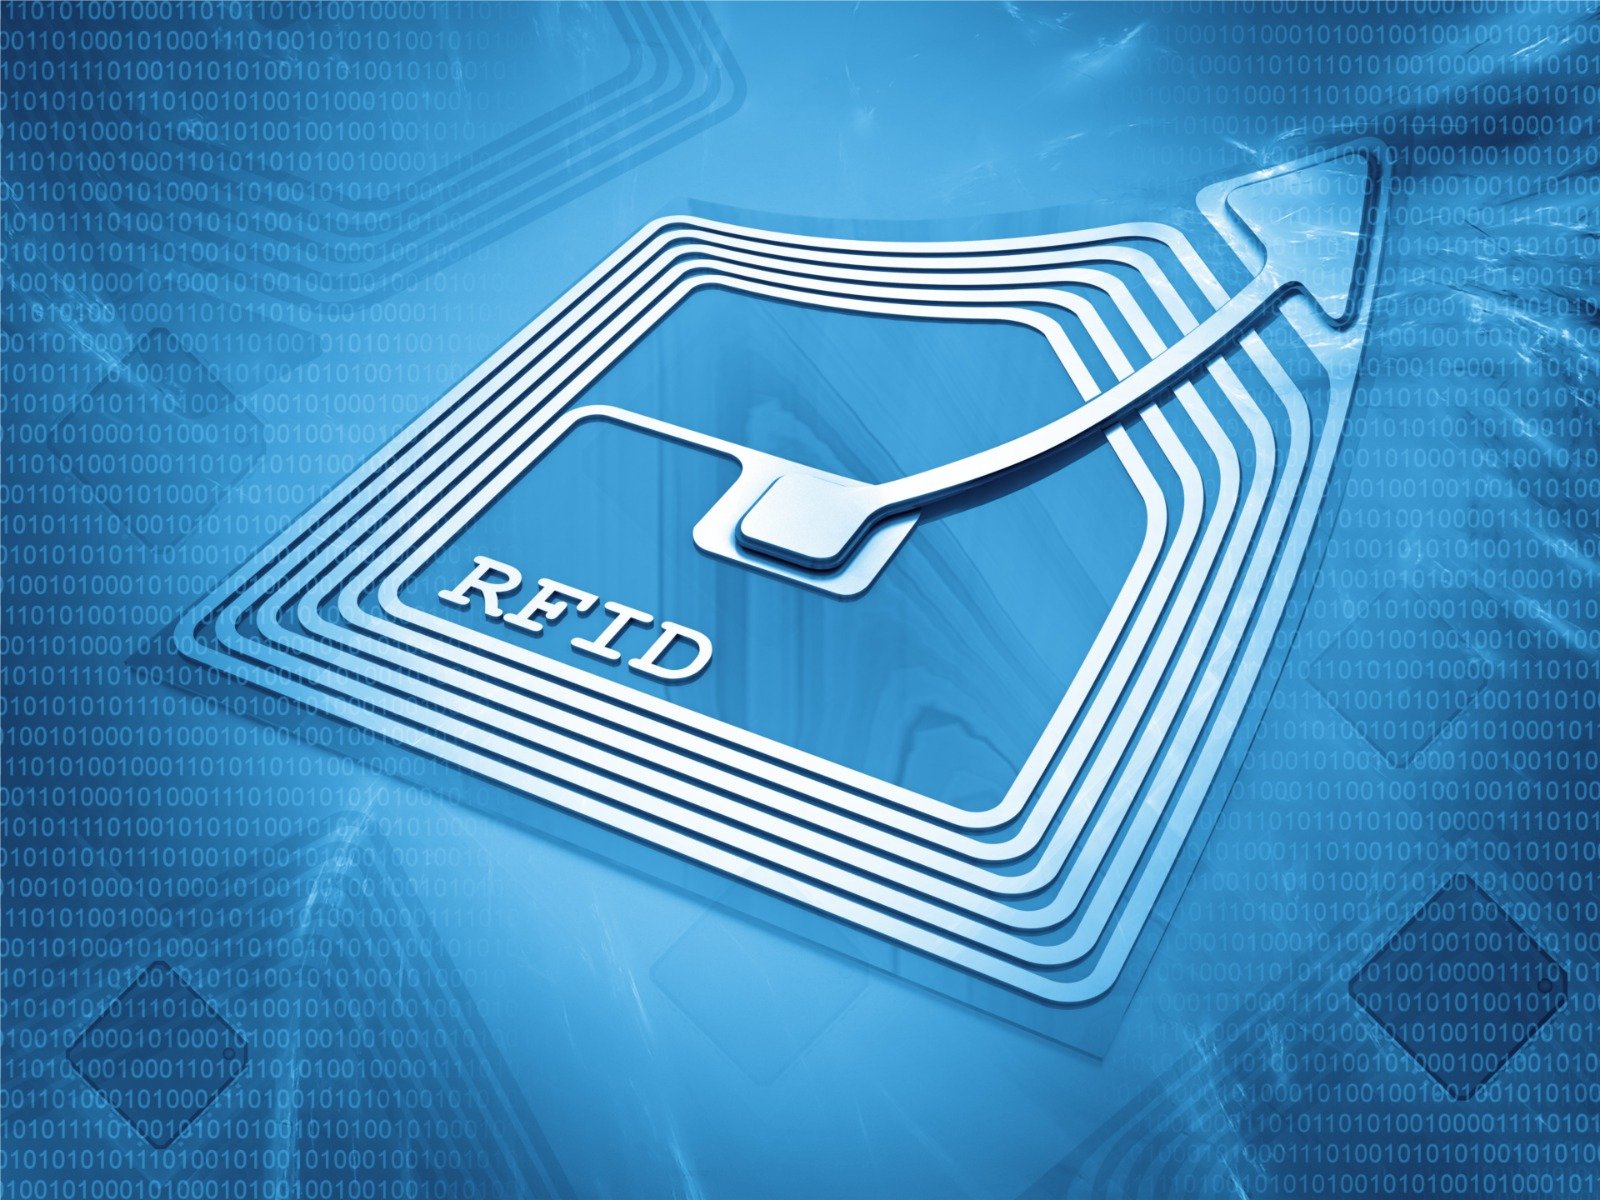 How to Code RFID Tag